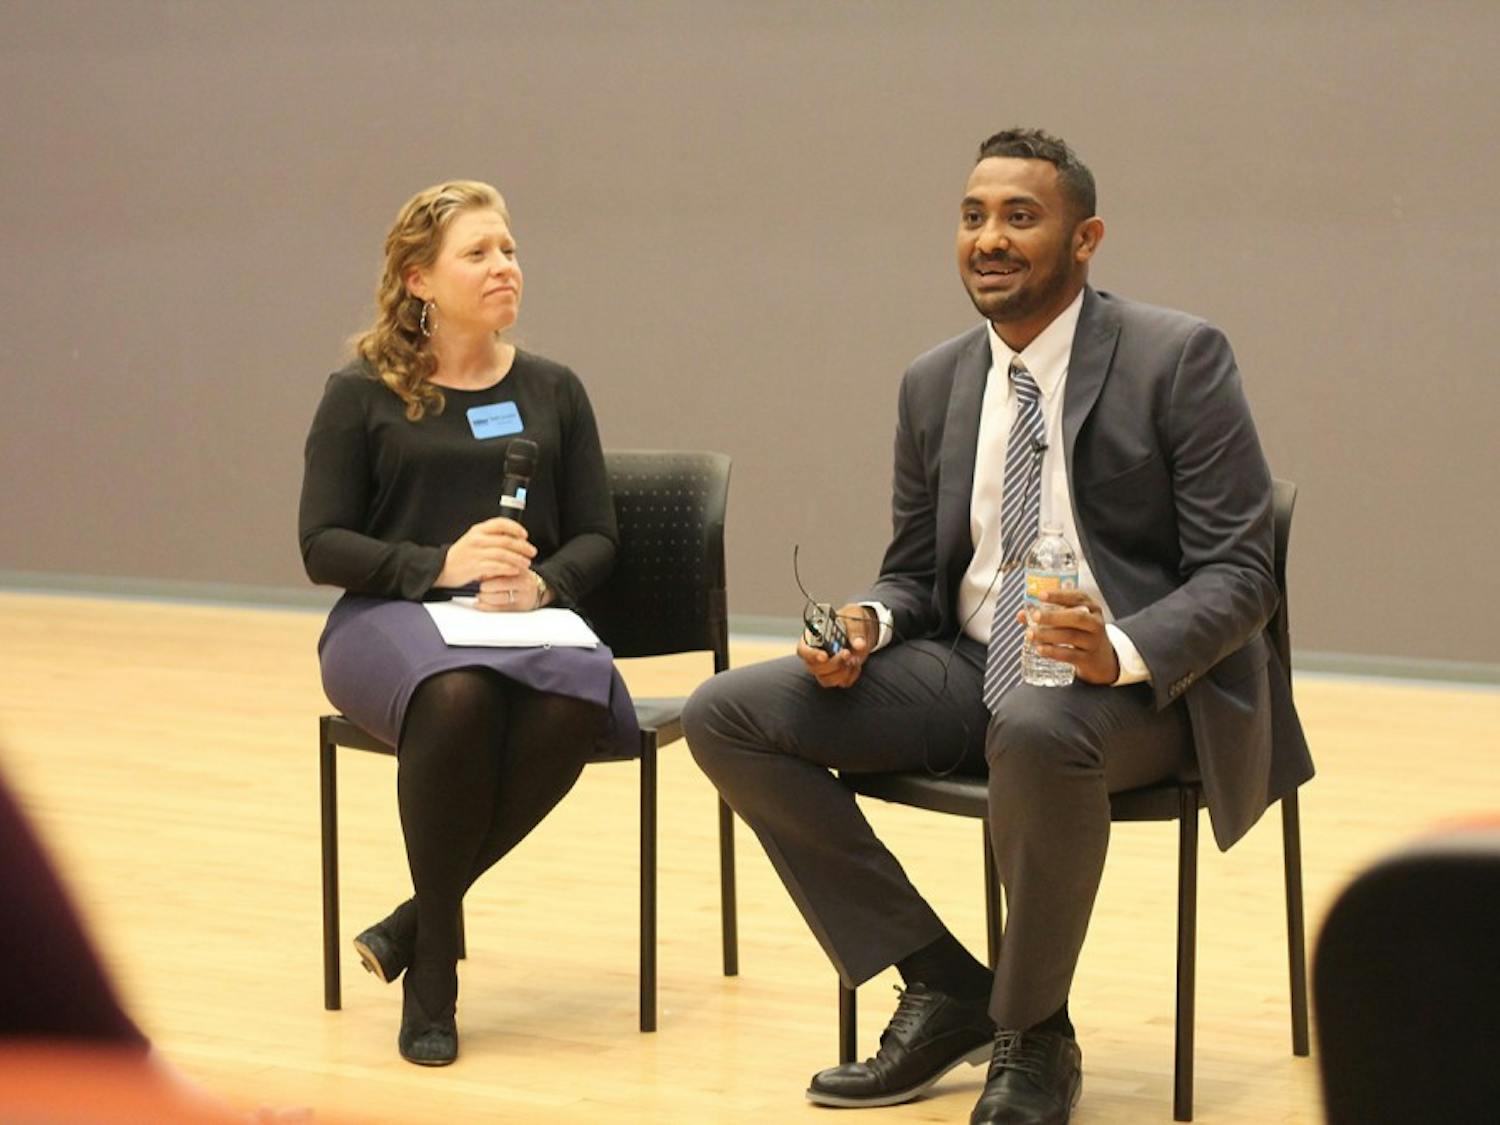 Mohamed Abubakr, a civil and human rights activist from Sudan, discusses his life experiences that led to his service in the nonprofit sector and refugee challenges throughout Africa.